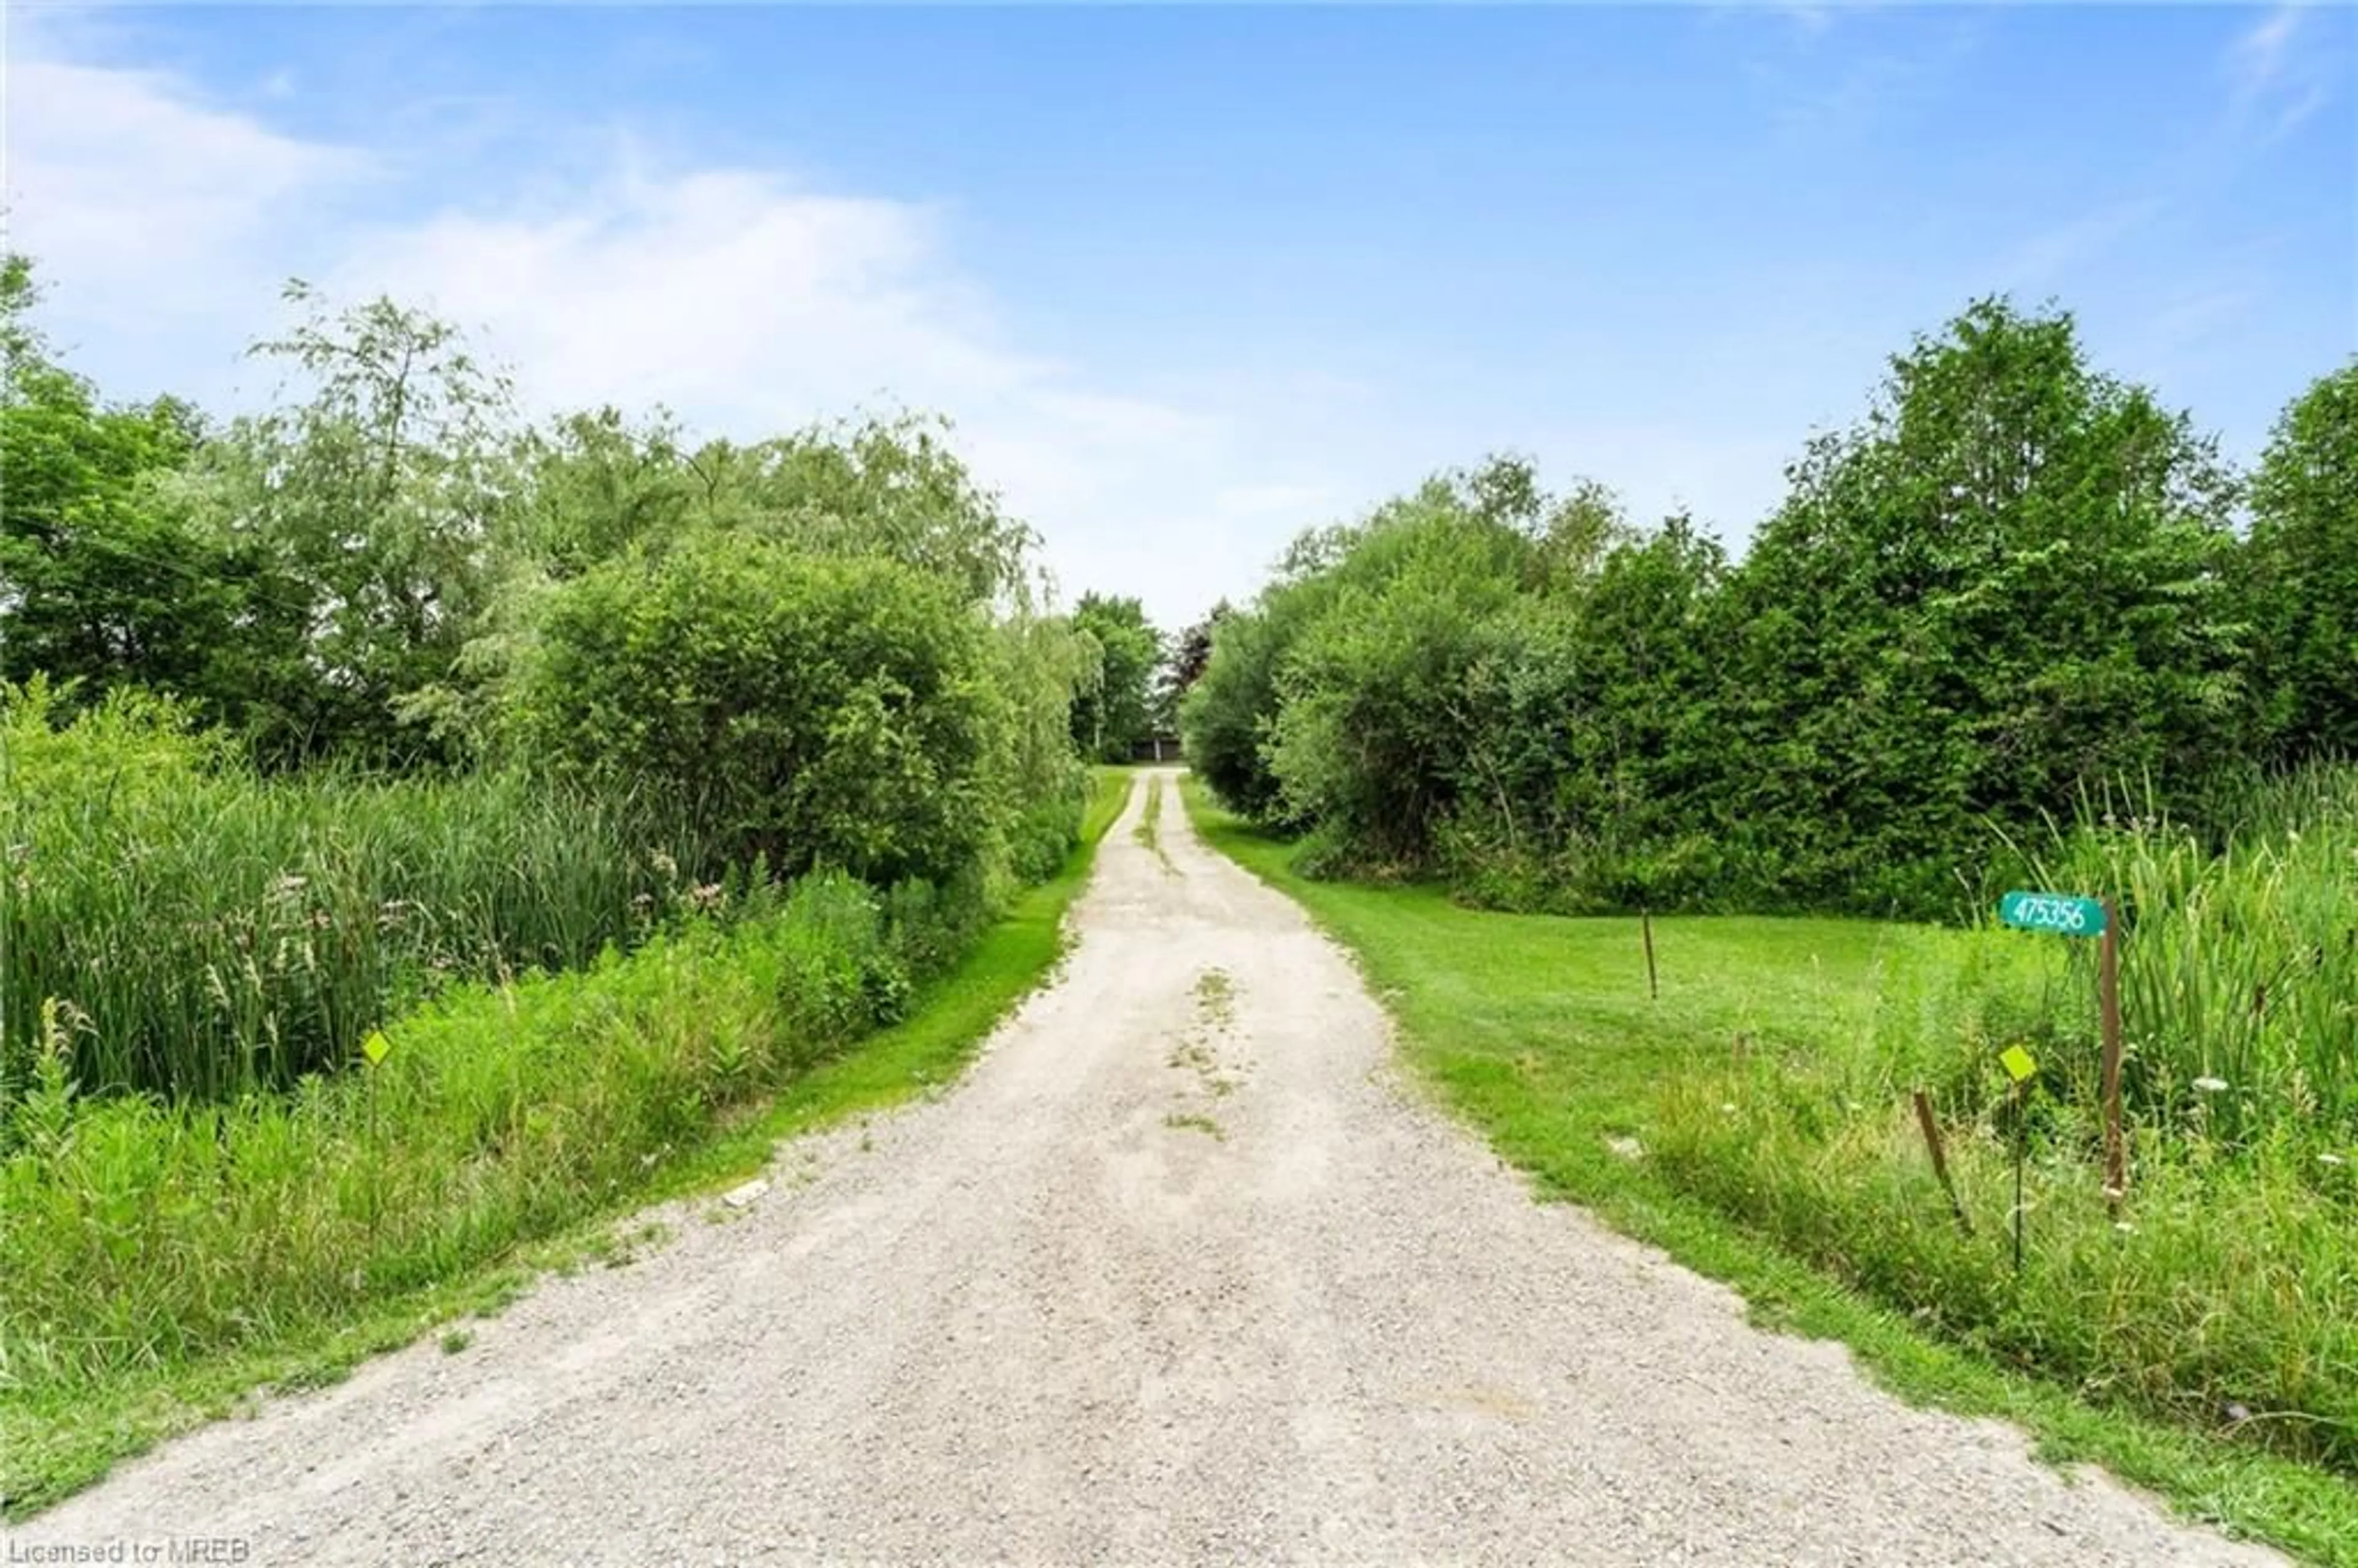 Street view for 475356 County Road 11, Amaranth Ontario L9V 1L1